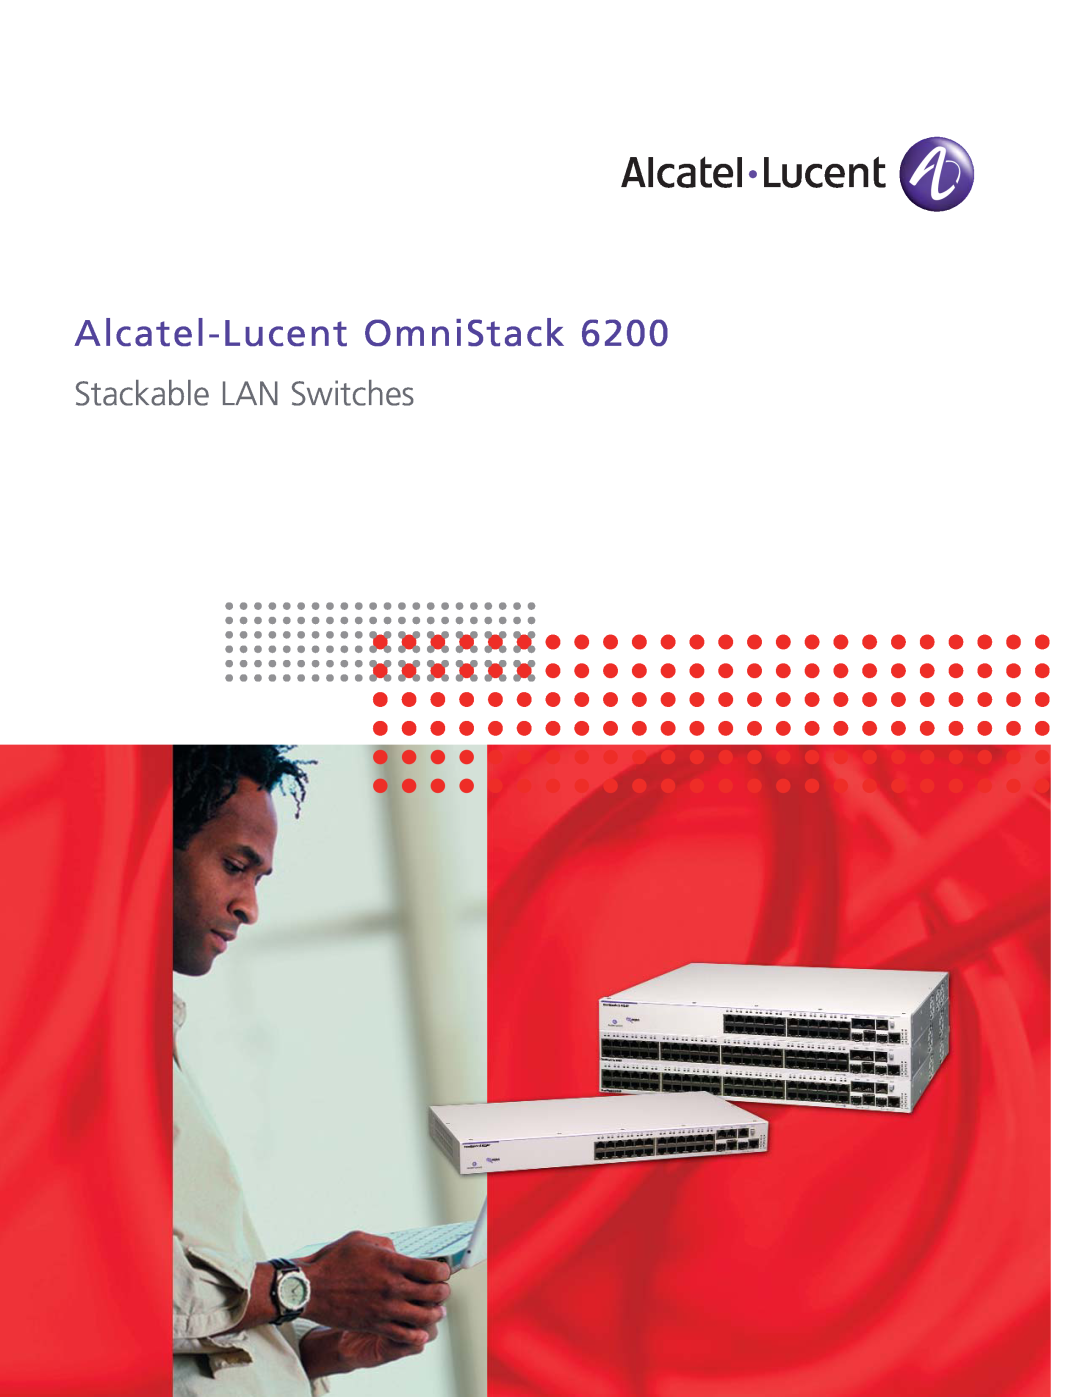 Riverstone Networks OmniStack 6200 manual Alcatel-Lucent OmniStack, Stackable LAN Switches 